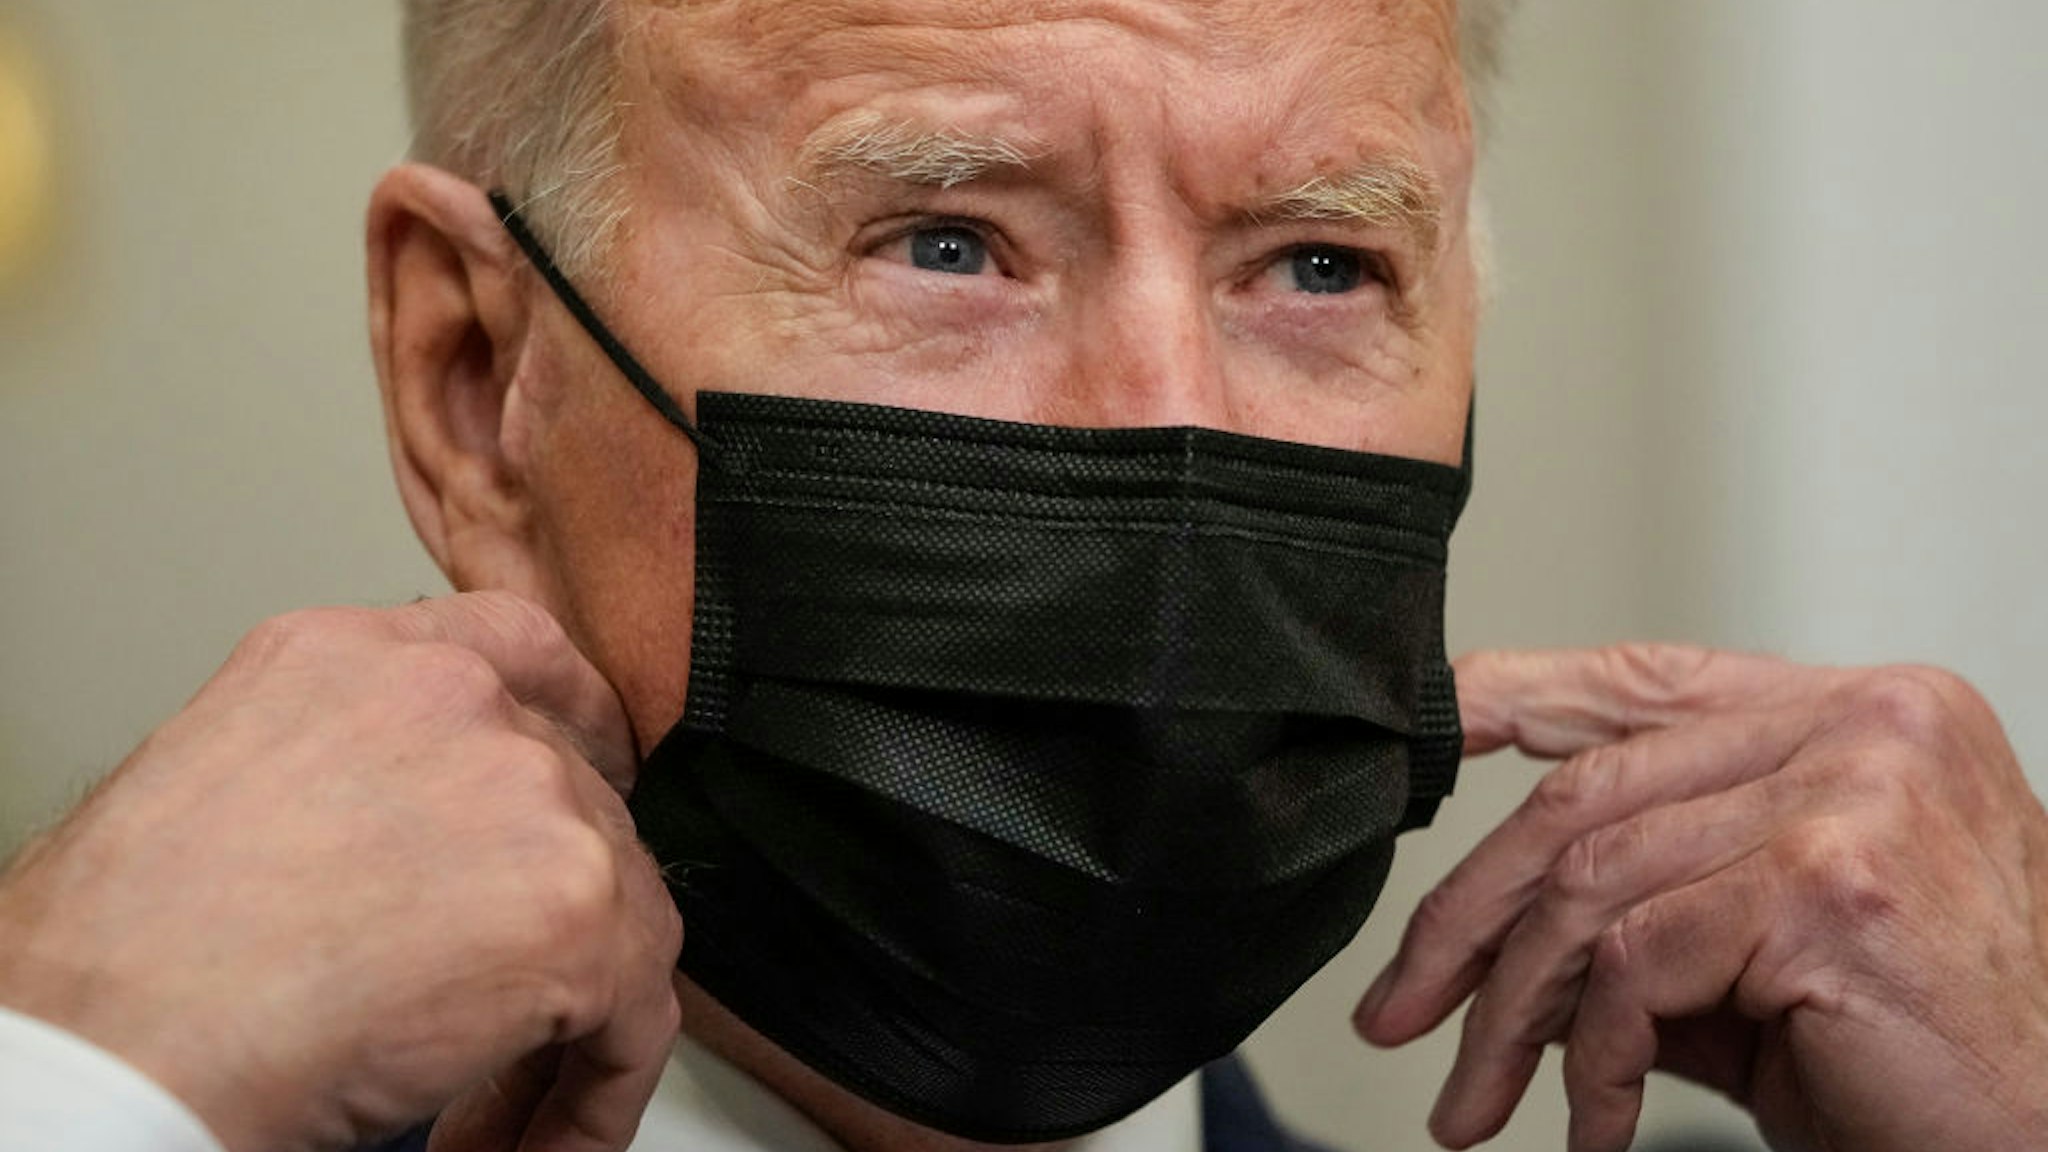 resident Joe Biden removes his mask as he arrives to speak about the situation in Afghanistan in the Roosevelt Room of the White House on August 24, 2021 in Washington, DC.